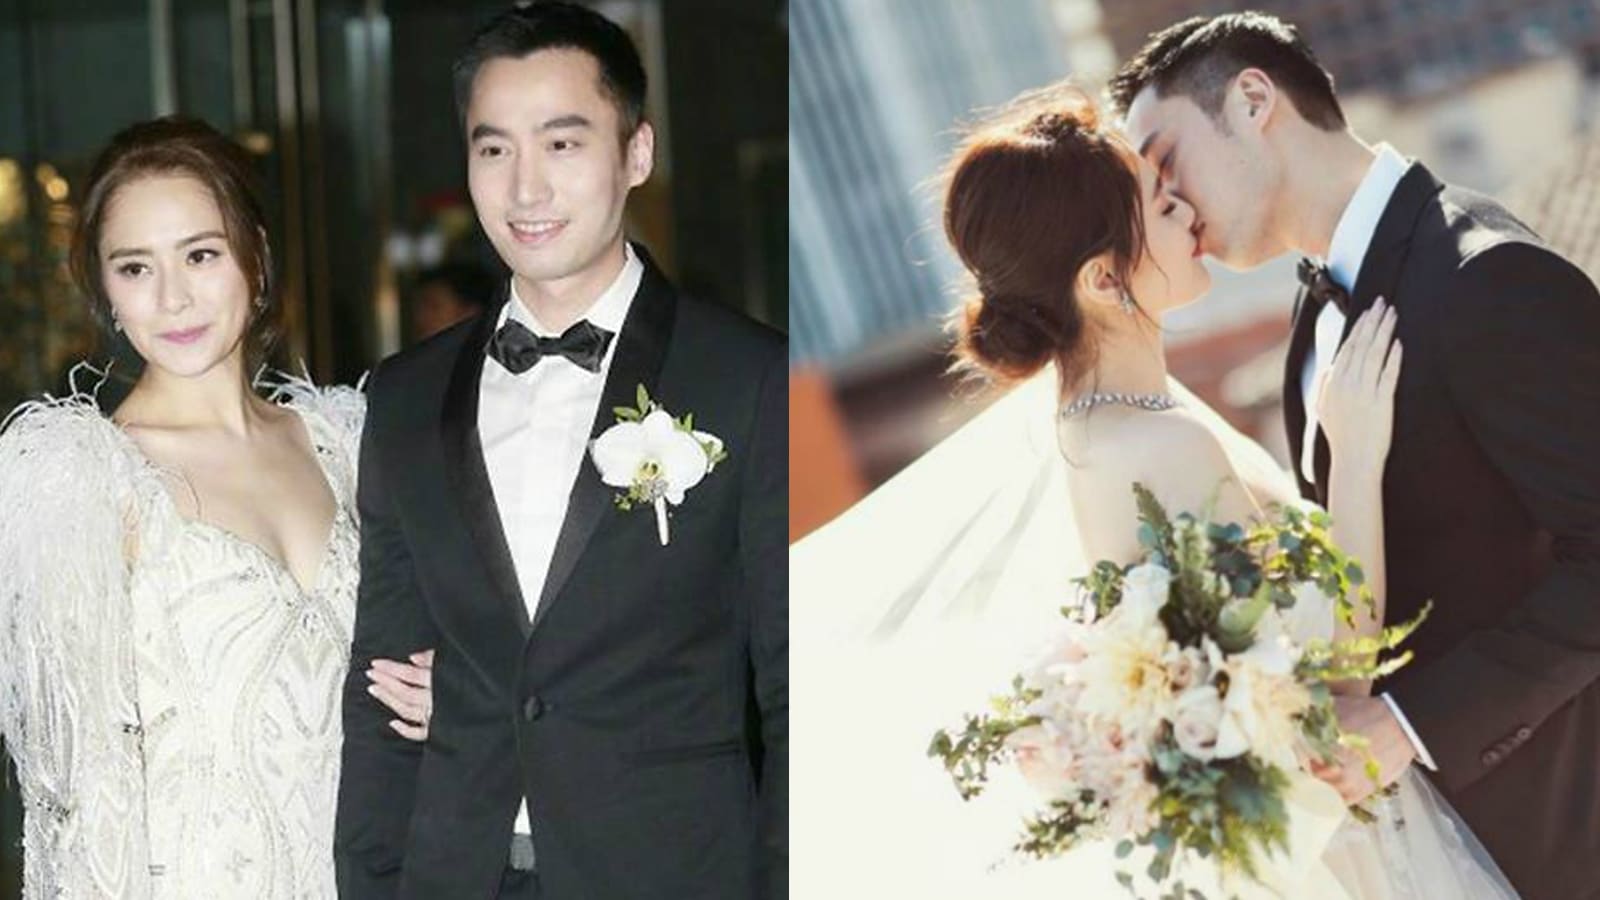 Gillian Chung And Michael Lai Divorce After Less Than 2 Years Of Marriage